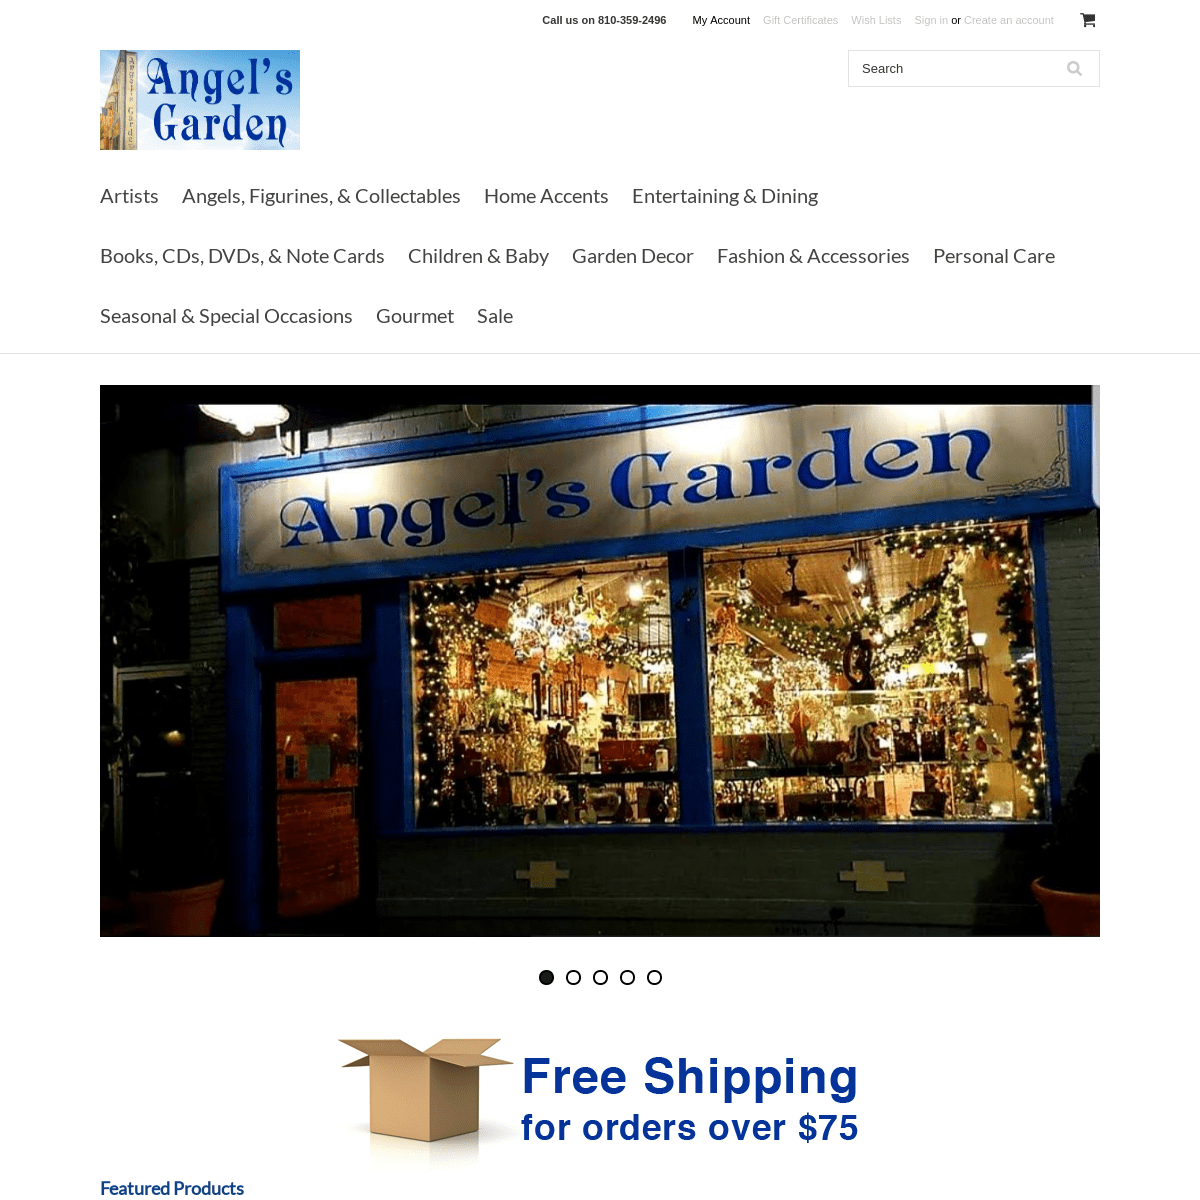 A complete backup of angelsgardengifts.com